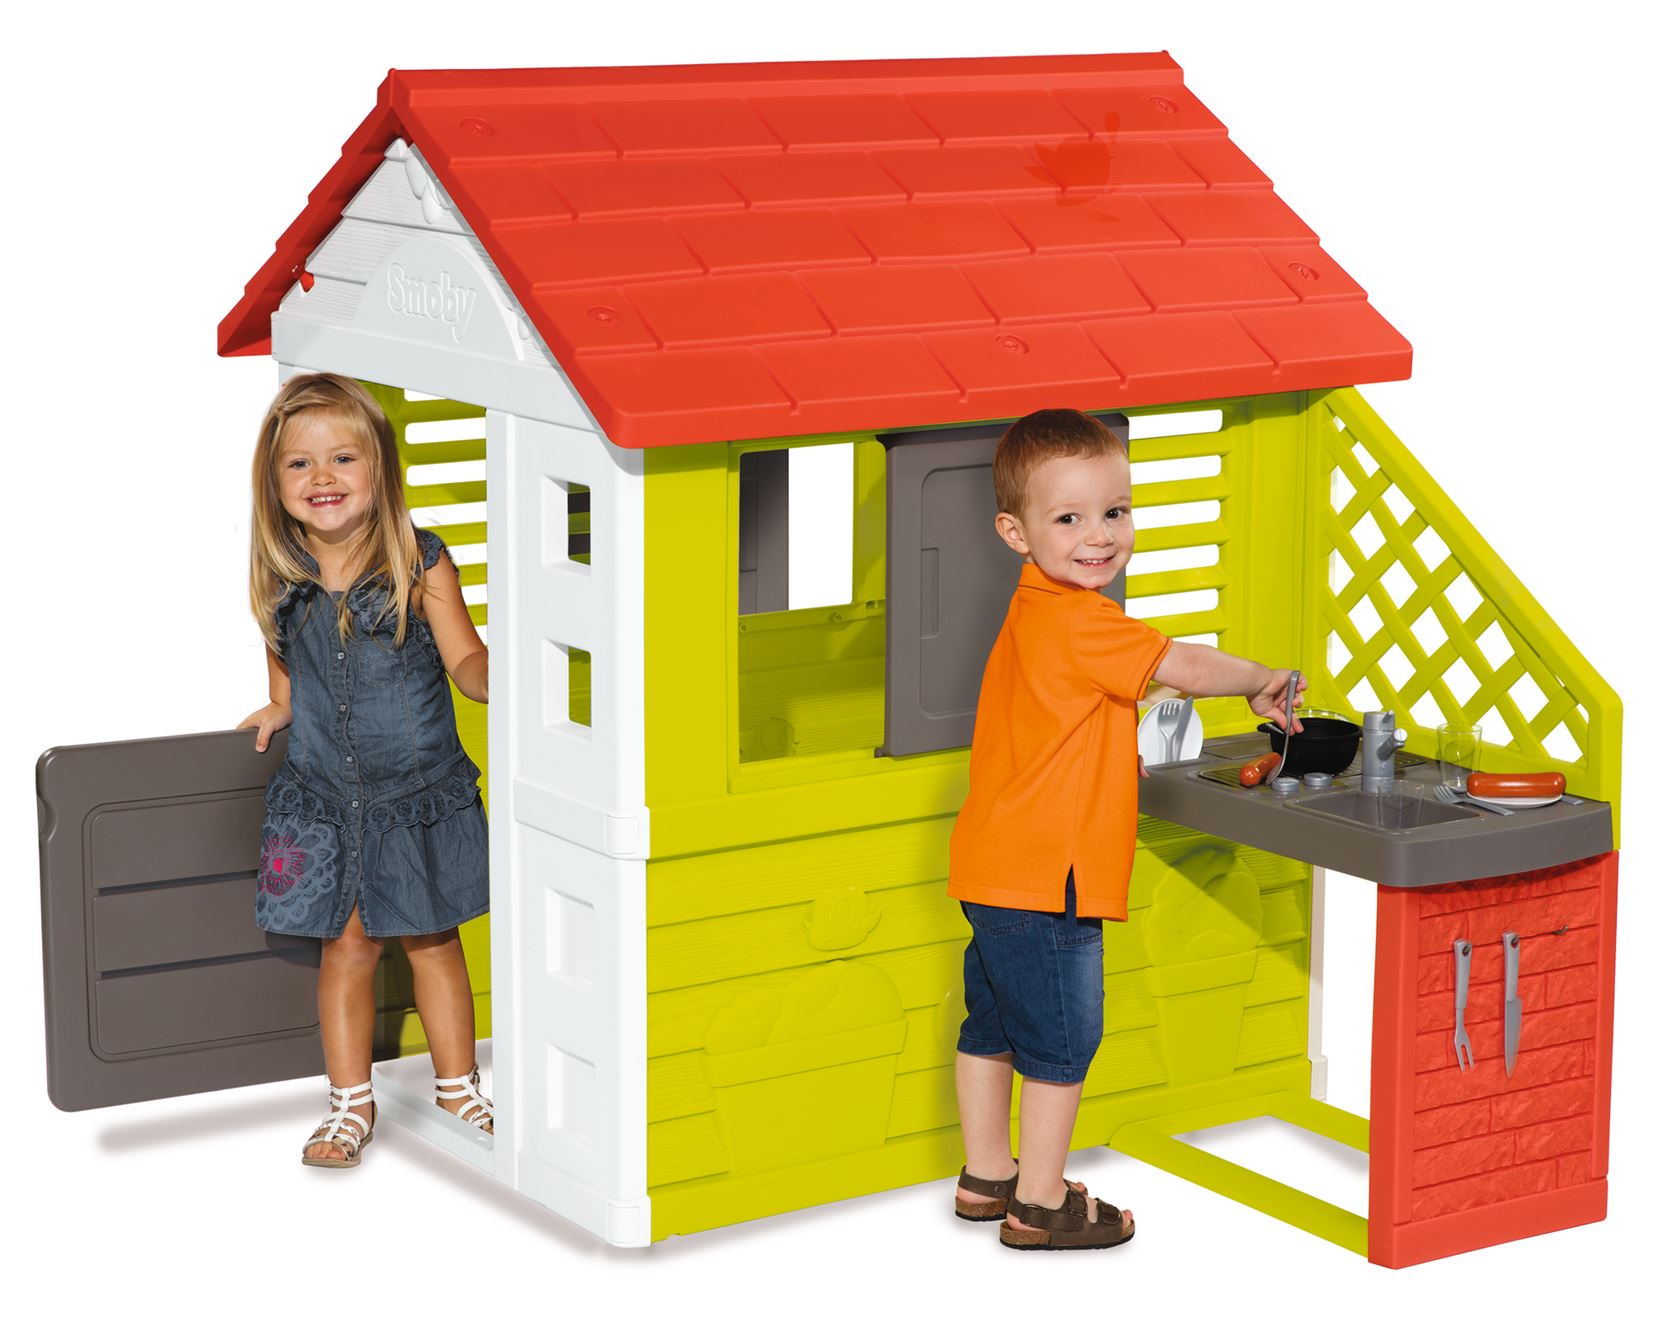 Smoby Nature playhouse with outdoor kitchen - perfect for the little kitchen prince(s)!